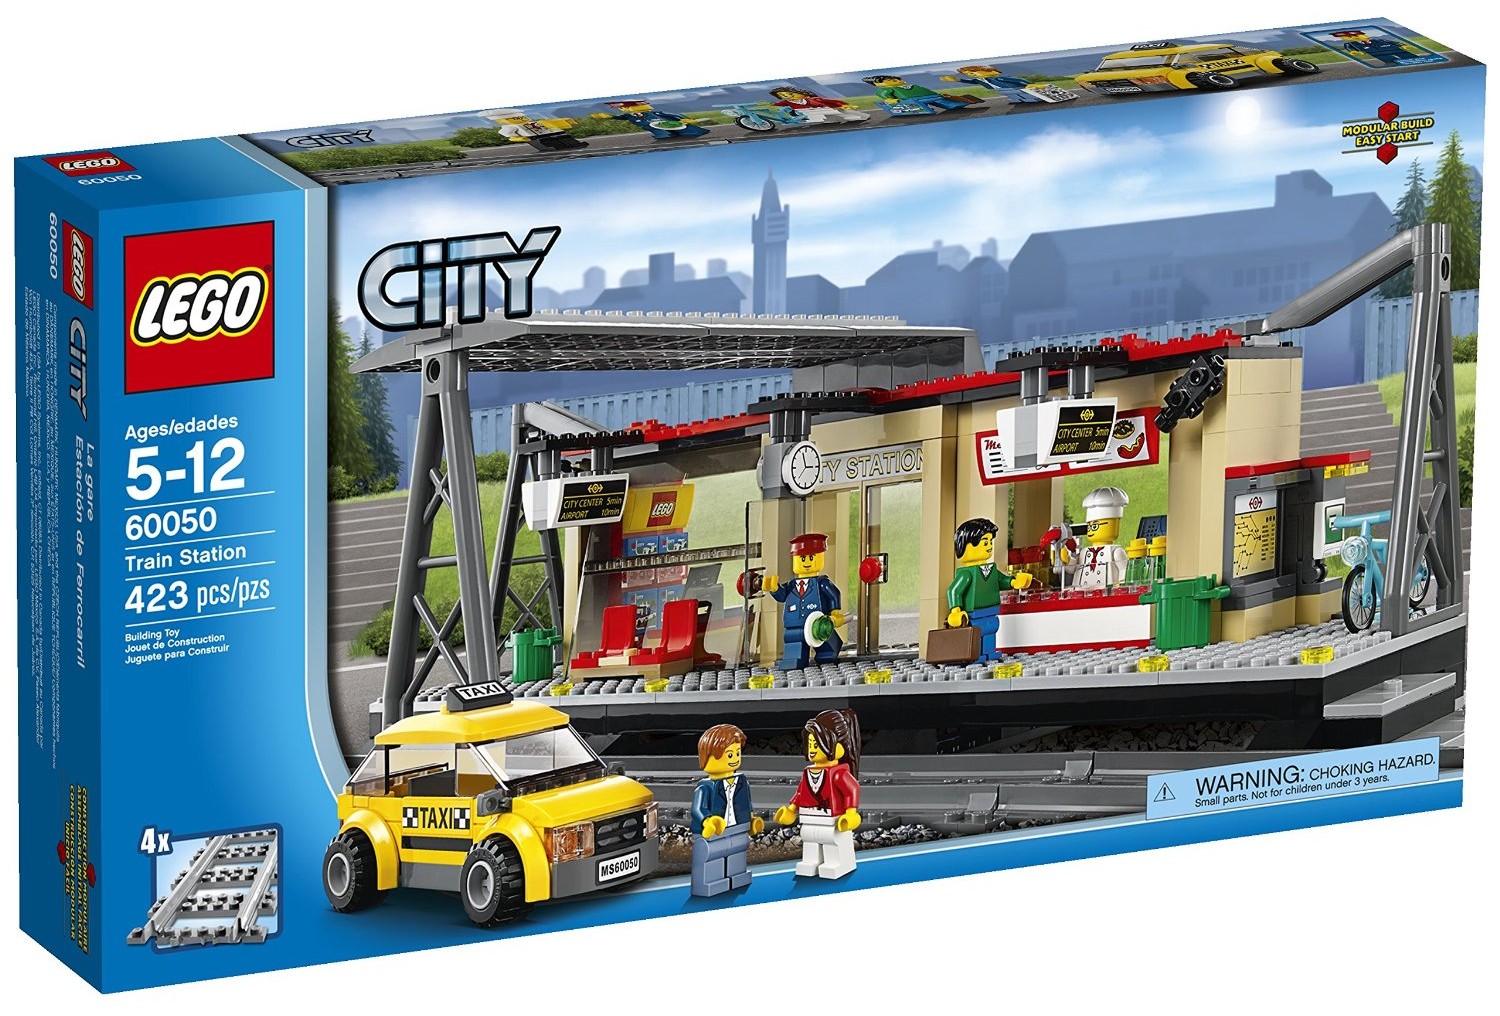 LEGO City Trains Train Station Only $40.98!!